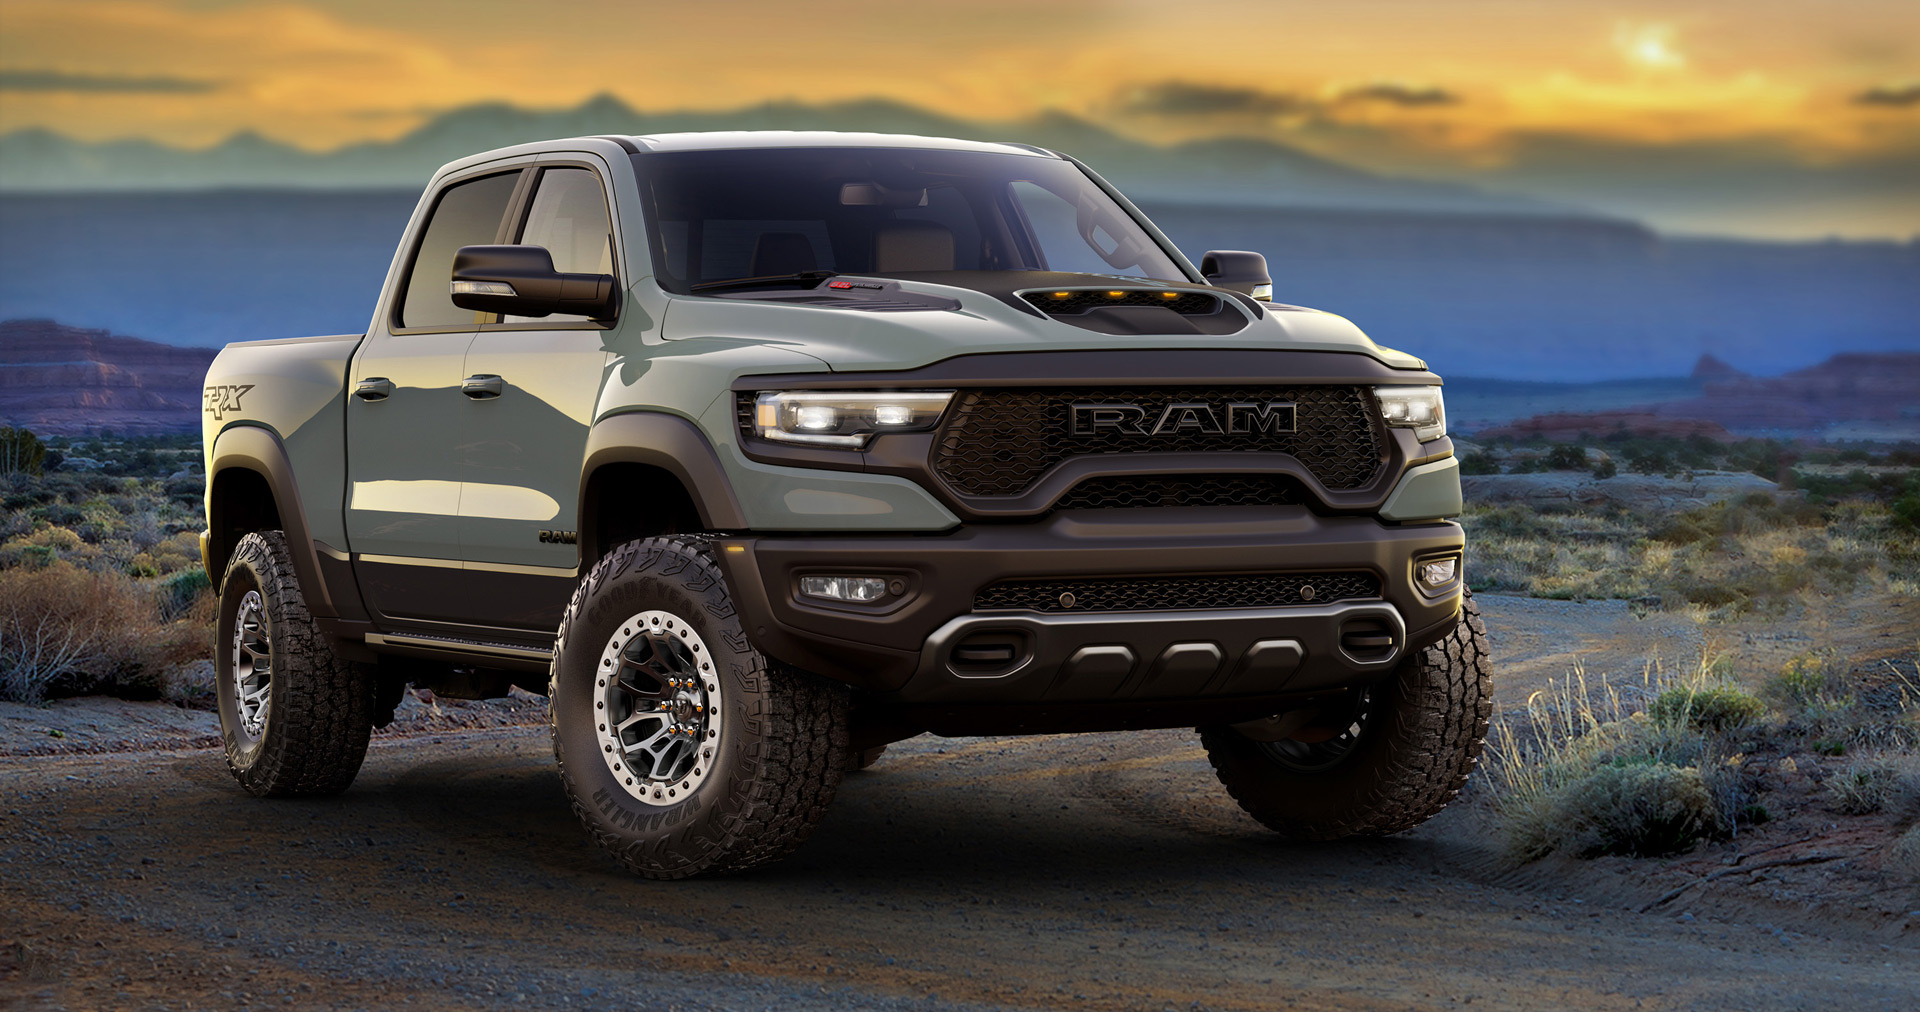 2021 Ram 1500 TRX Launch Edition is a truck limited 702 units